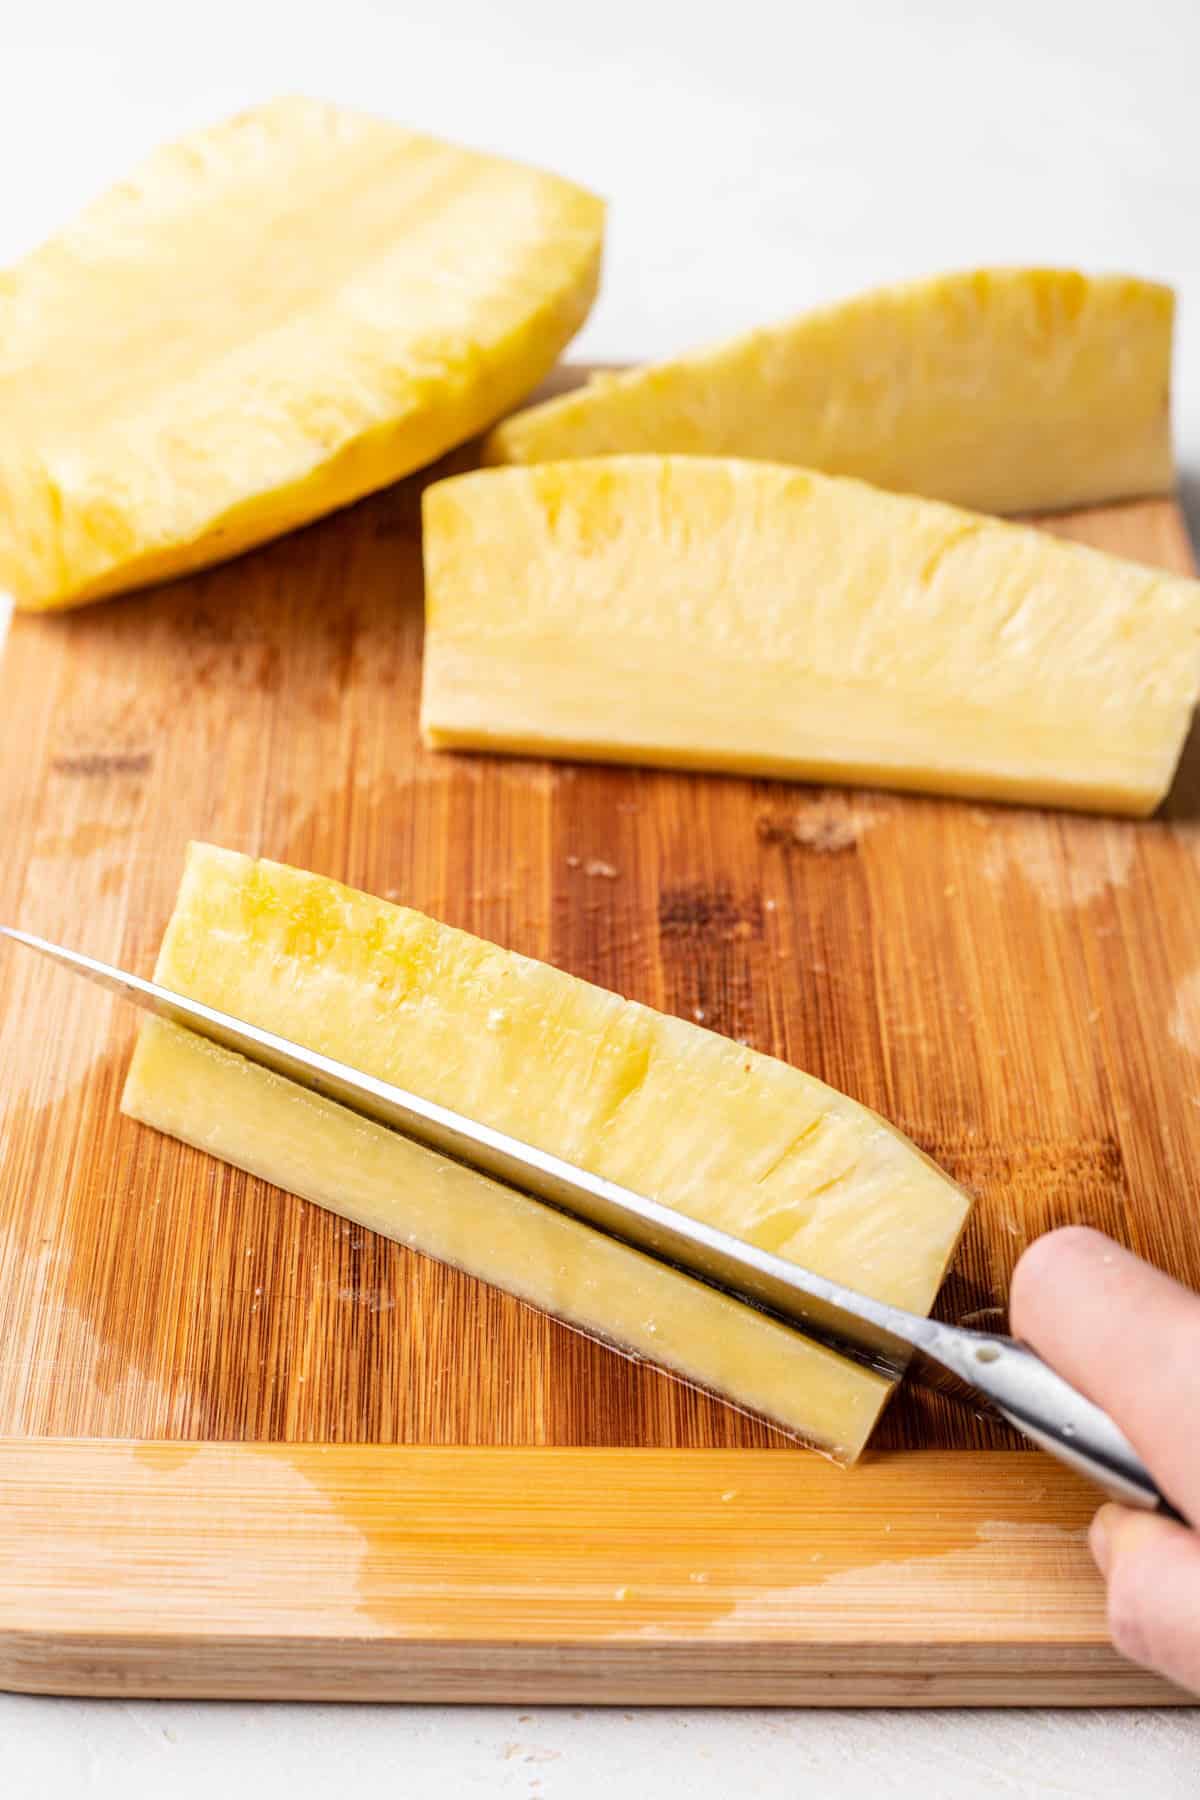 A knife cutting the core off of the pineapple spear. 